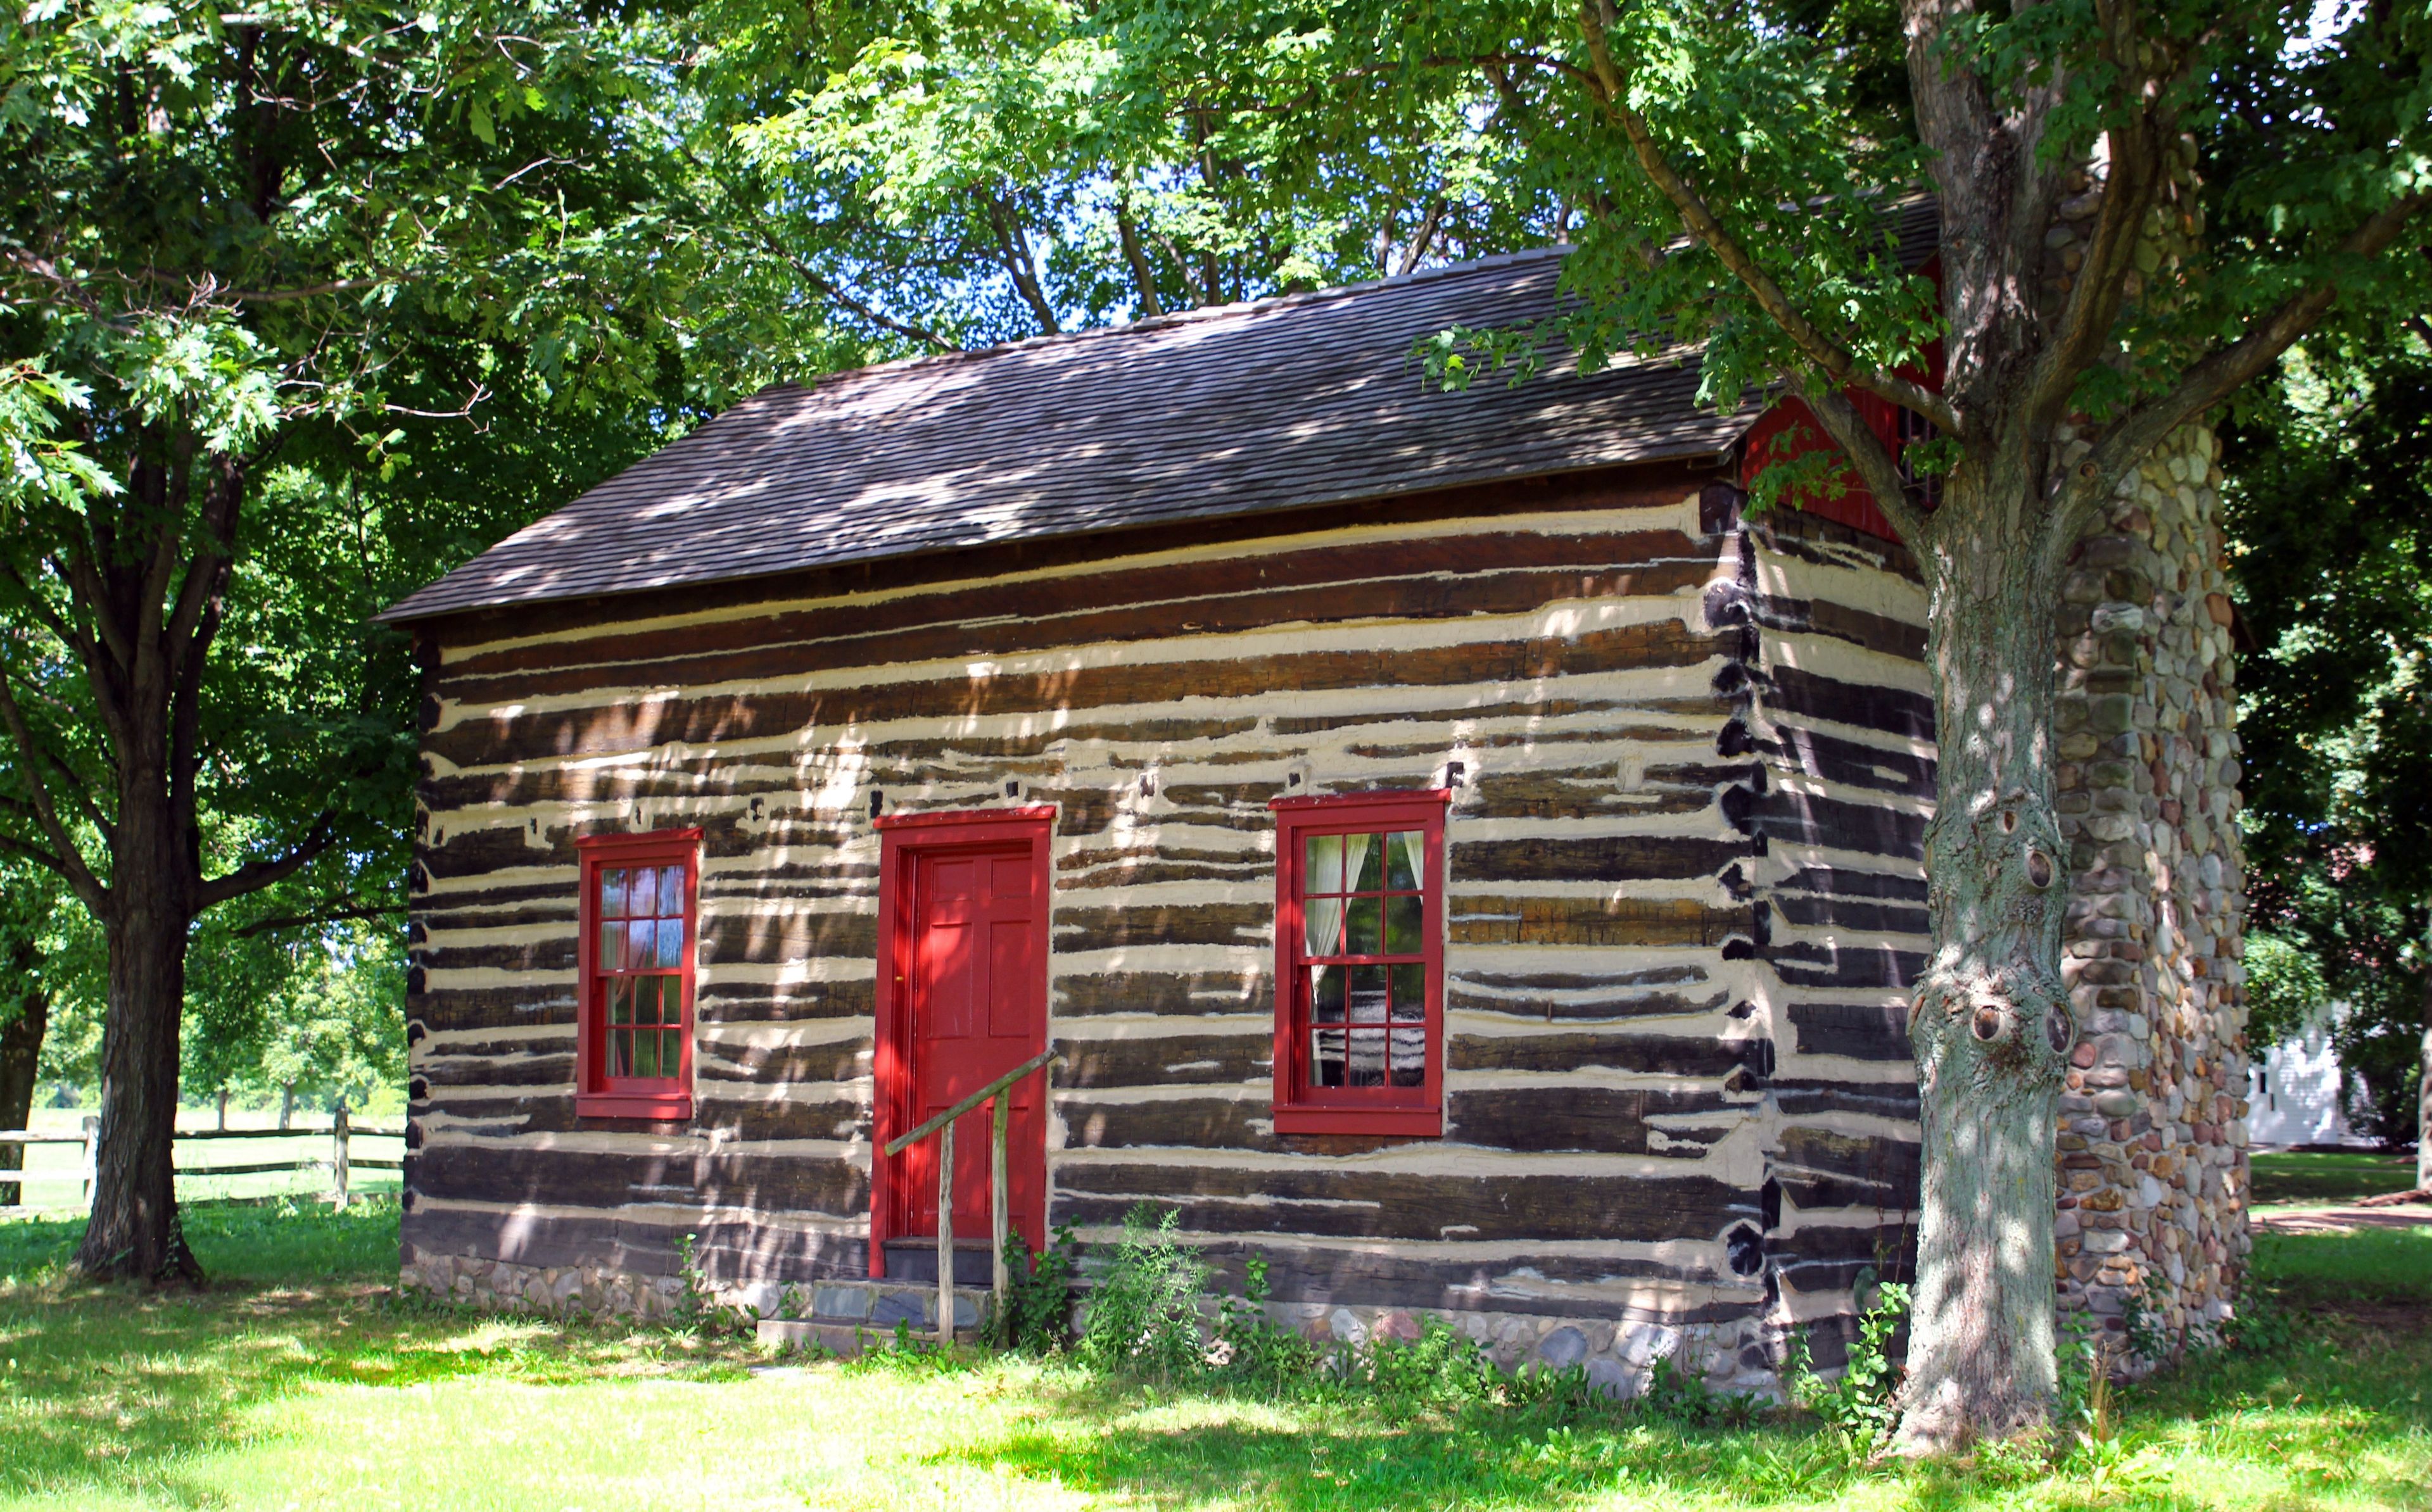 A view of the Peter Whitmer cabin in Fayette, New York.